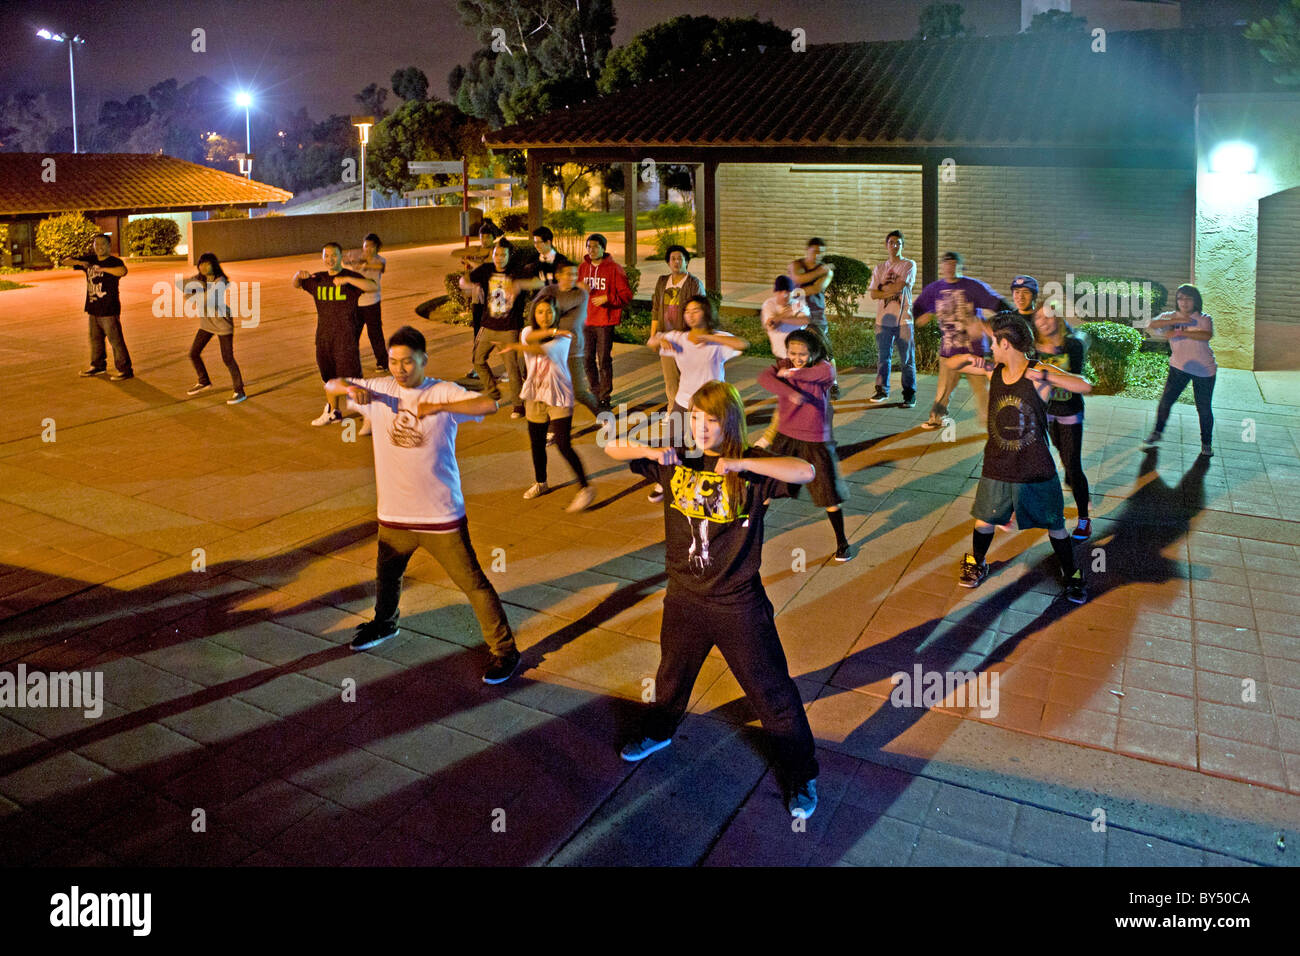 An Asian American college student conducts an informal night hip hop dancing class outdoors on campus in California. Stock Photo